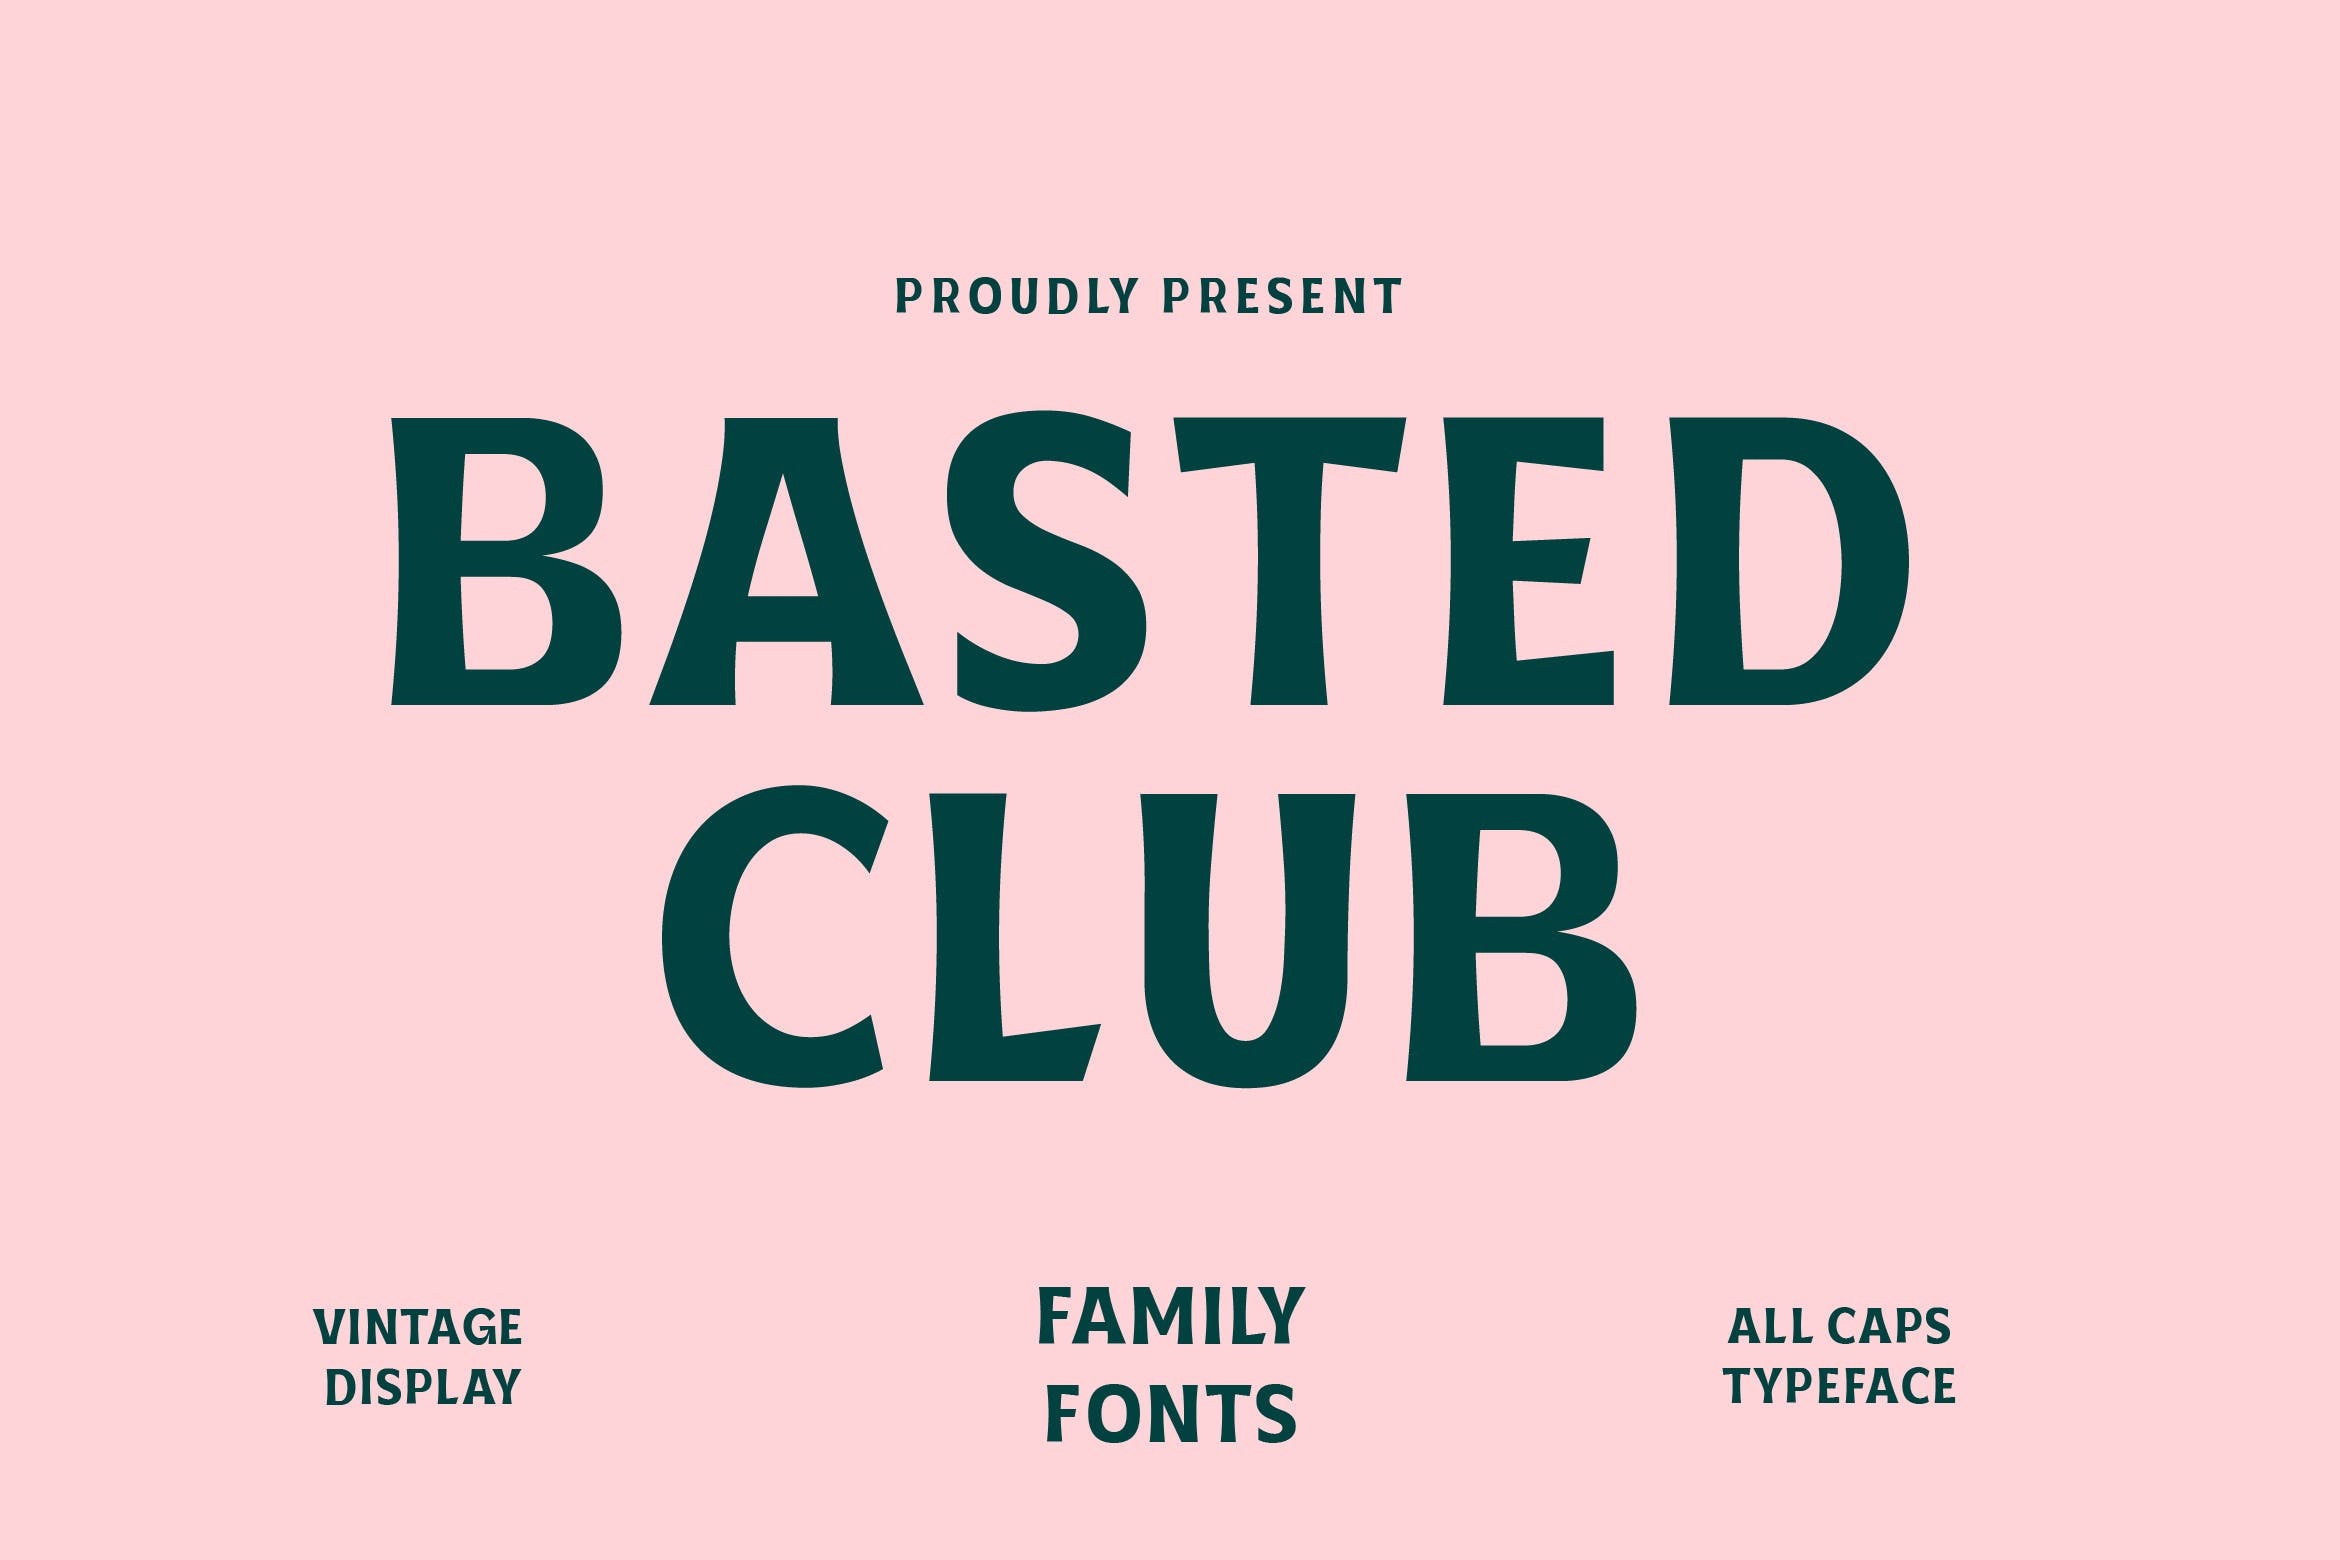 Font Basted Clubs